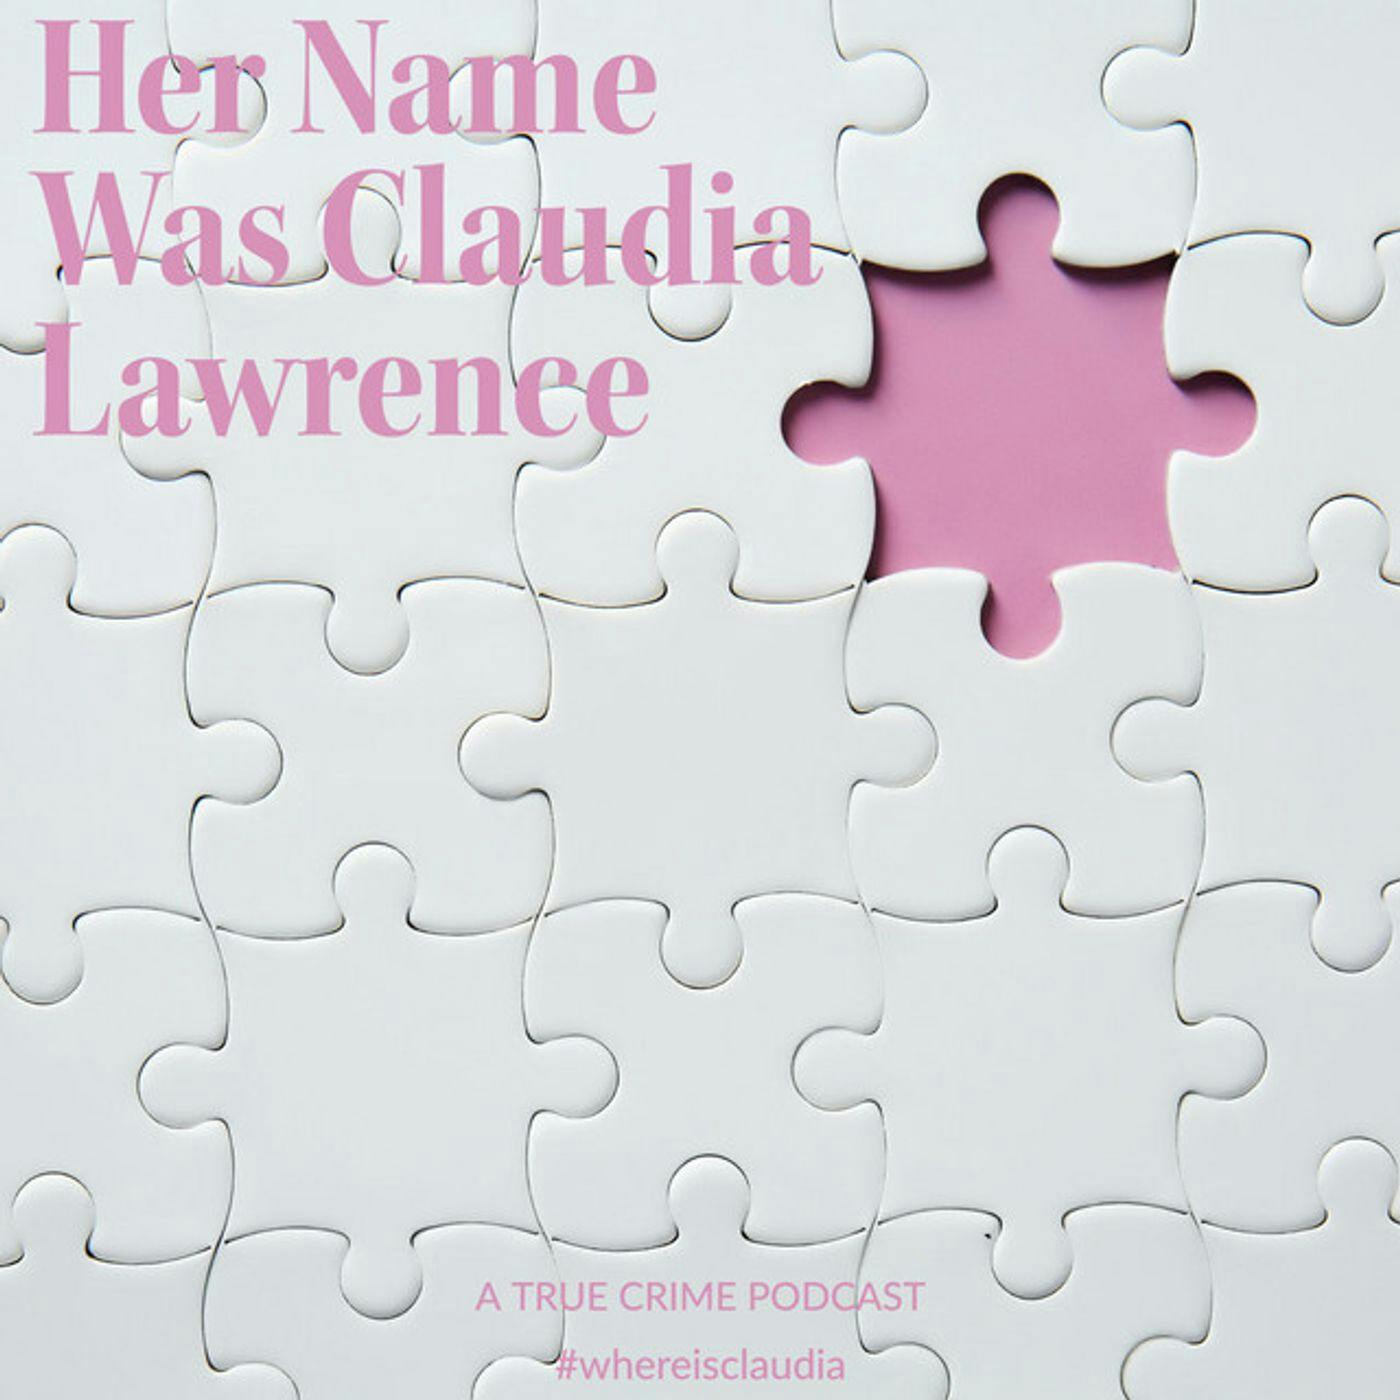 Ep 6: Her Name Was Claudia Lawrence 'The Search Continues'